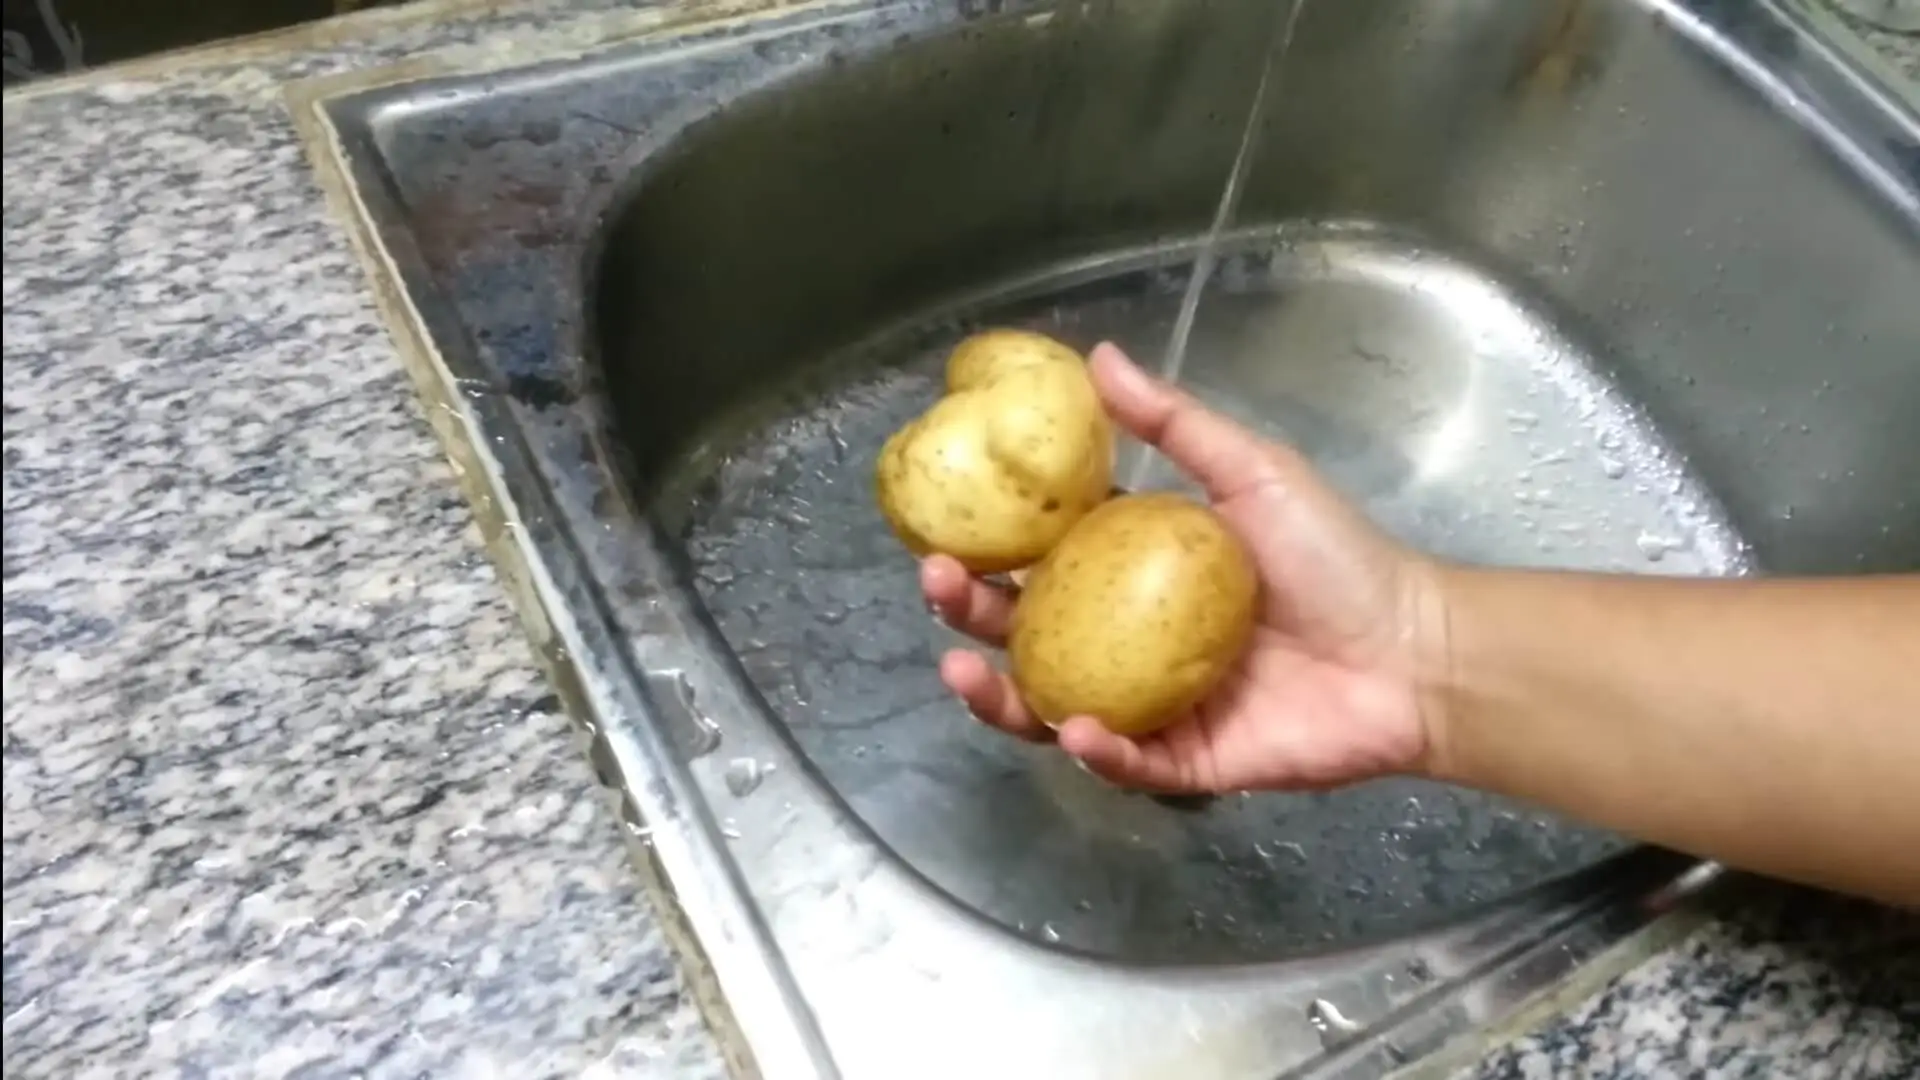 Clean and Peel the Potatoes